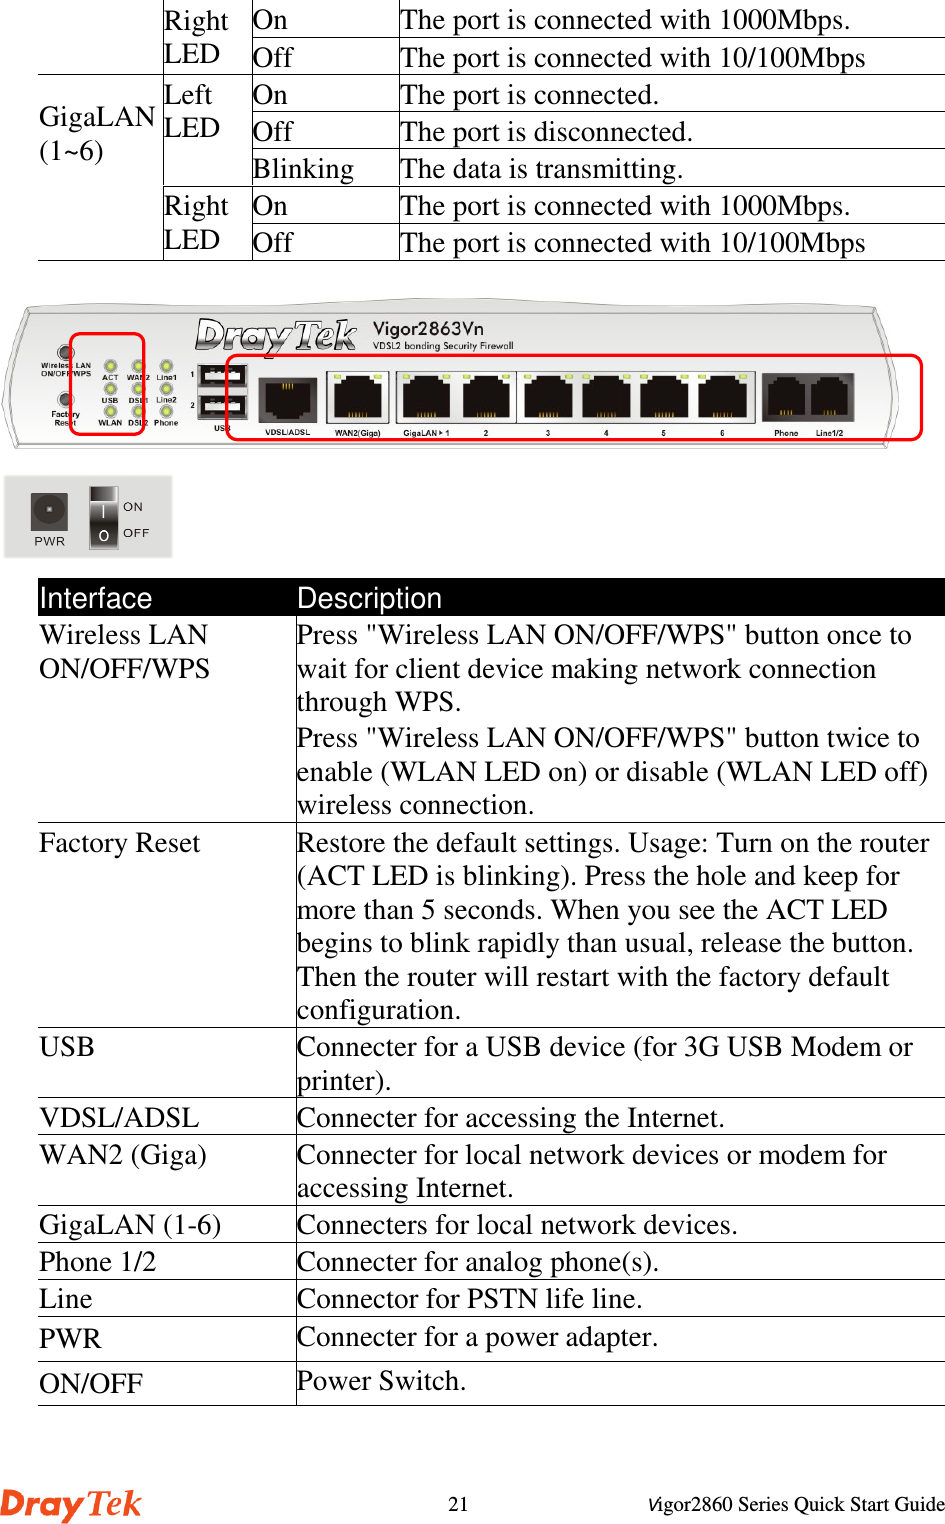 Vigor2860 Series Quick Start Guide21On The port is connected with 1000Mbps.RightLED Off The port is connected with 10/100MbpsOn The port is connected.Off The port is disconnected.LeftLEDBlinking The data is transmitting.On The port is connected with 1000Mbps.GigaLAN(1~6)RightLED Off The port is connected with 10/100MbpsInterface DescriptionWireless LANON/OFF/WPSPress &quot;Wireless LAN ON/OFF/WPS&quot; button once towait for client device making network connectionthrough WPS.Press &quot;Wireless LAN ON/OFF/WPS&quot; button twice toenable (WLAN LED on) or disable (WLAN LED off)wireless connection.Factory Reset Restore the default settings. Usage: Turn on the router(ACT LED is blinking). Press the hole and keep formore than 5 seconds. When you see the ACT LEDbegins to blink rapidly than usual, release the button.Then the router will restart with the factory defaultconfiguration.USB Connecter for a USB device (for 3G USB Modem orprinter).VDSL/ADSL Connecter for accessing the Internet.WAN2 (Giga) Connecter for local network devices or modem foraccessing Internet.GigaLAN (1-6) Connecters for local network devices.Phone 1/2 Connecter for analog phone(s).Line Connector for PSTN life line.PWR Connecter for a power adapter.ON/OFF Power Switch.